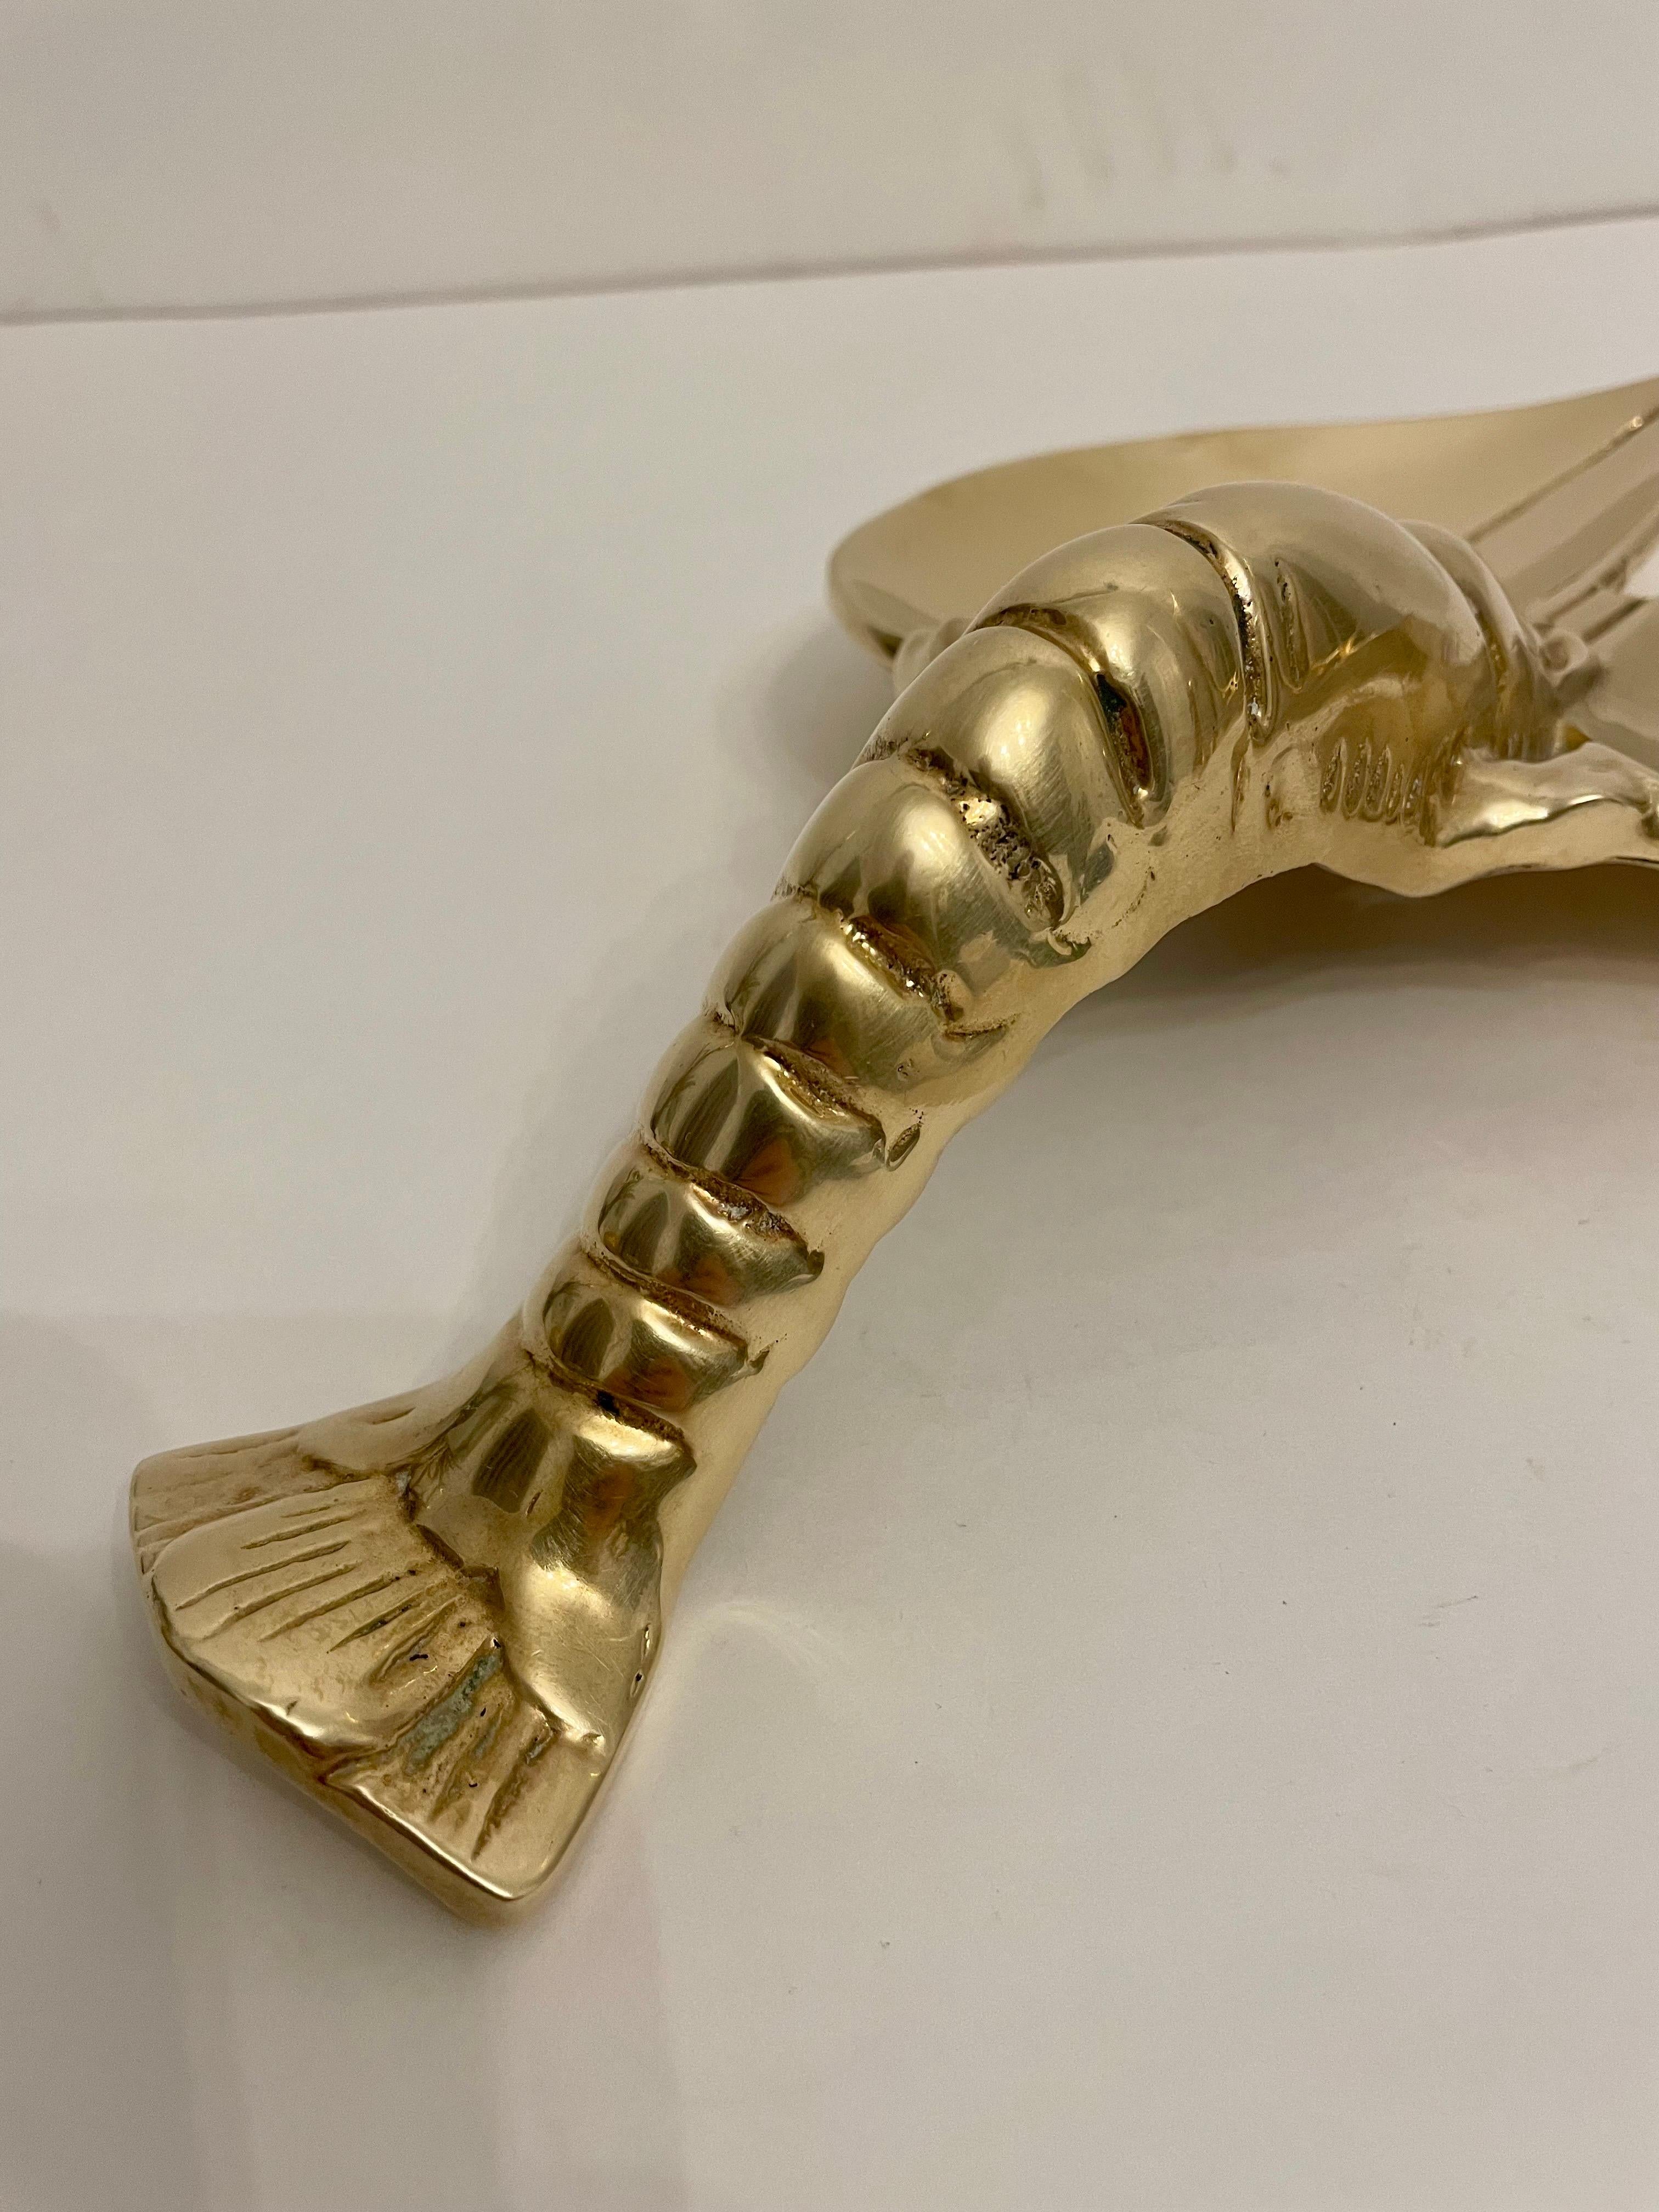 Very Large solid brass Lobster dish in the Hollywood Regency style. Measures: 13 1/2